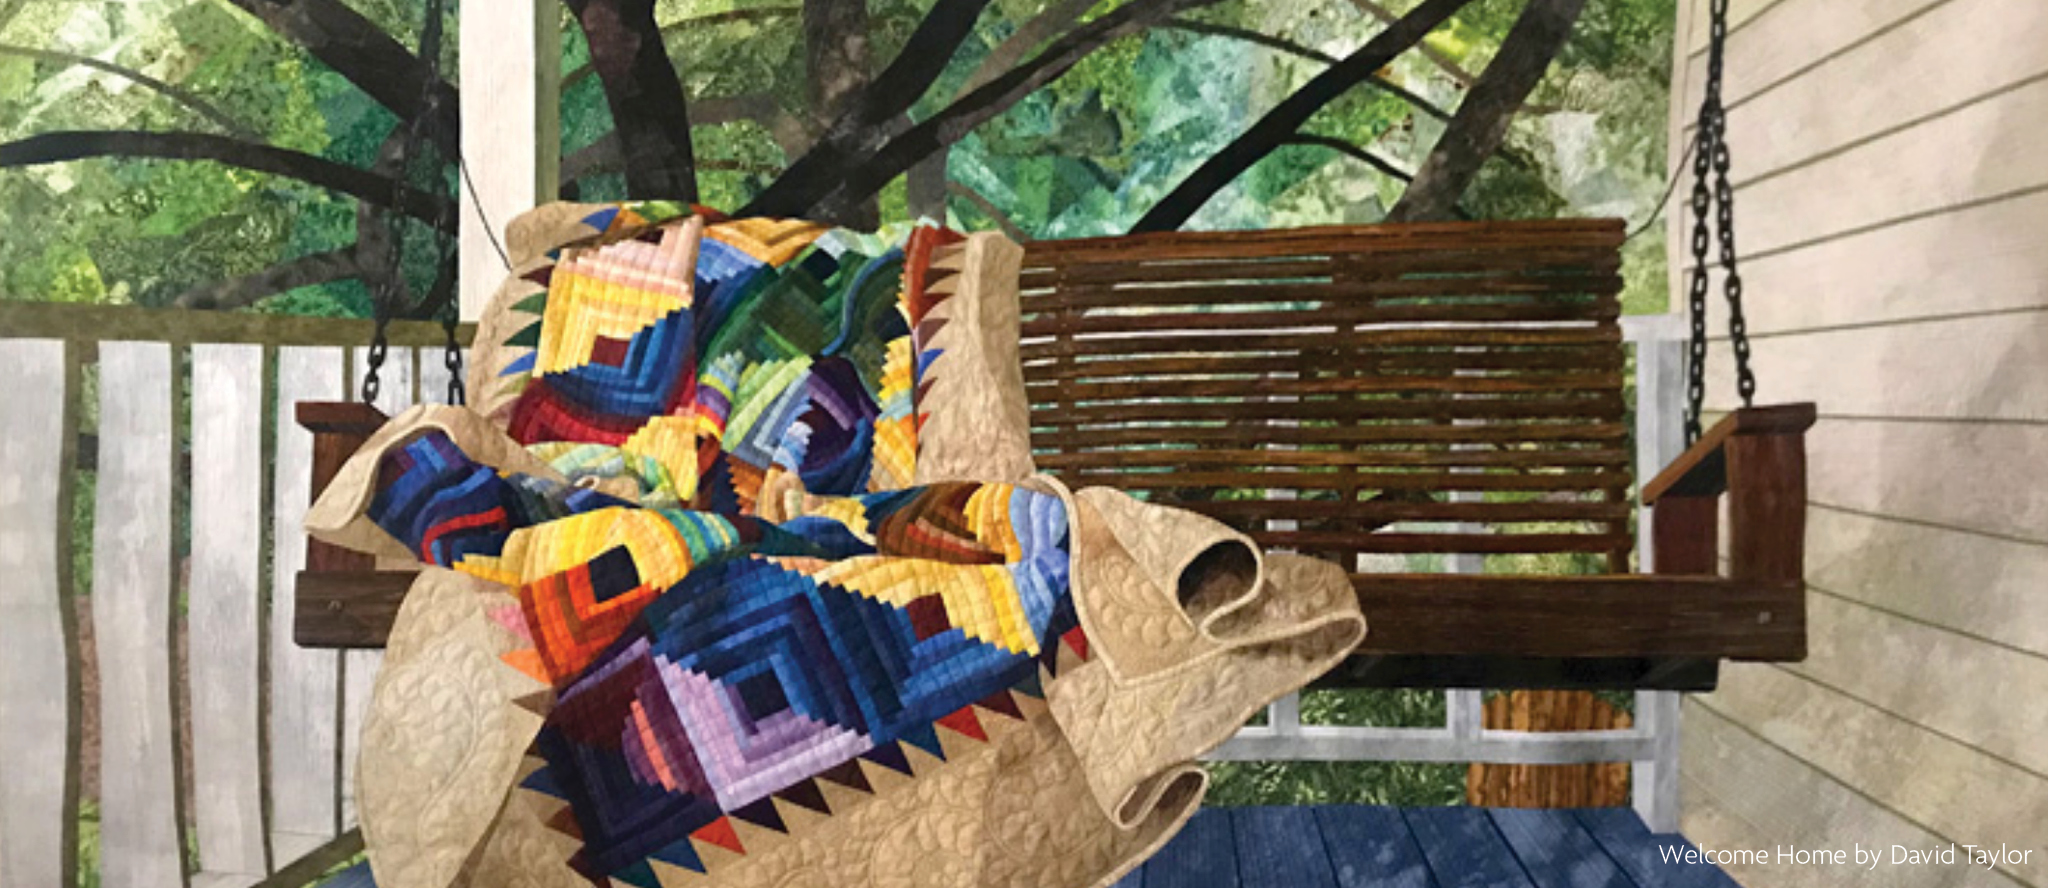 A quilt laid over a wooden porch swing with trees in the background. The piece is called "Welcome Home", by David Taylor.